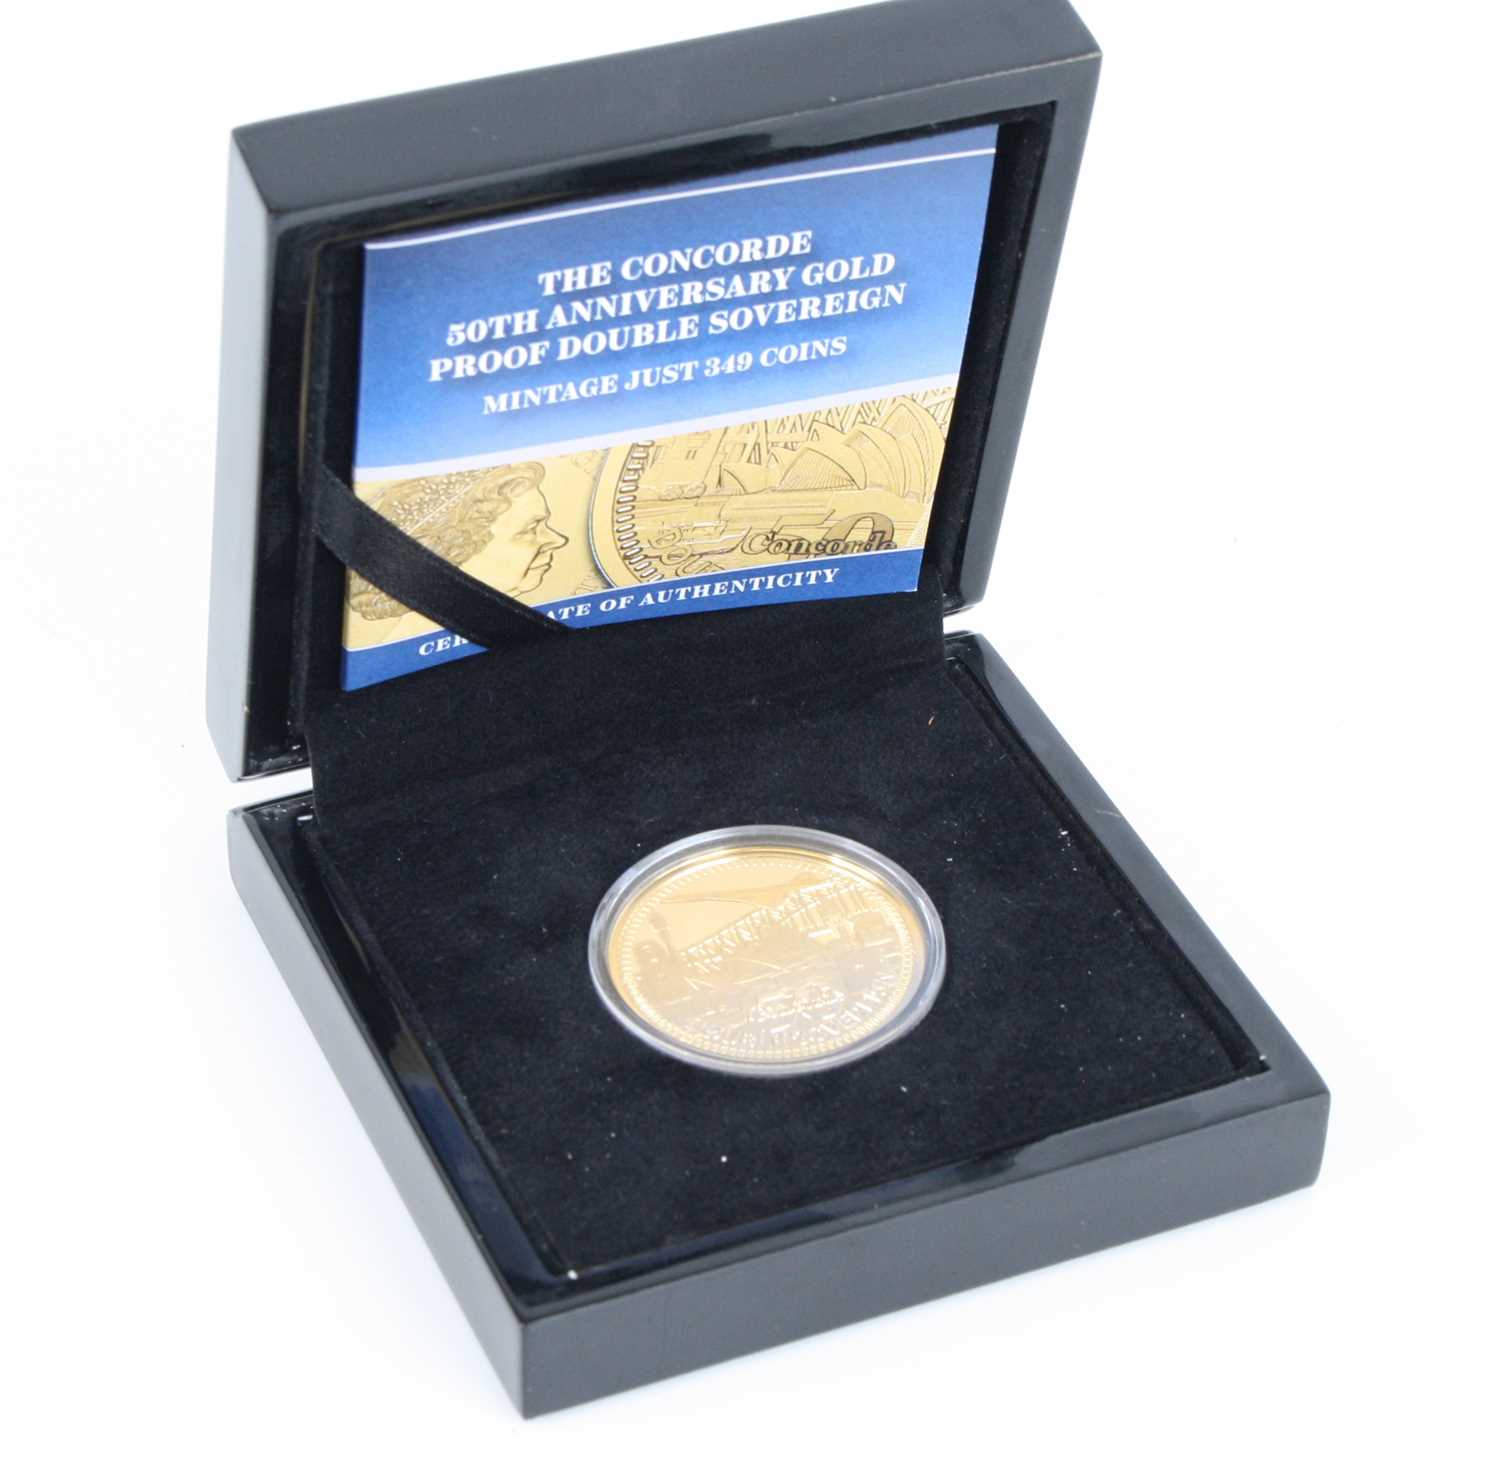 Gibraltar, 2019 The Concorde 50th Anniversary Gold Proof Double Sovereign, obv: Elizabeth II above